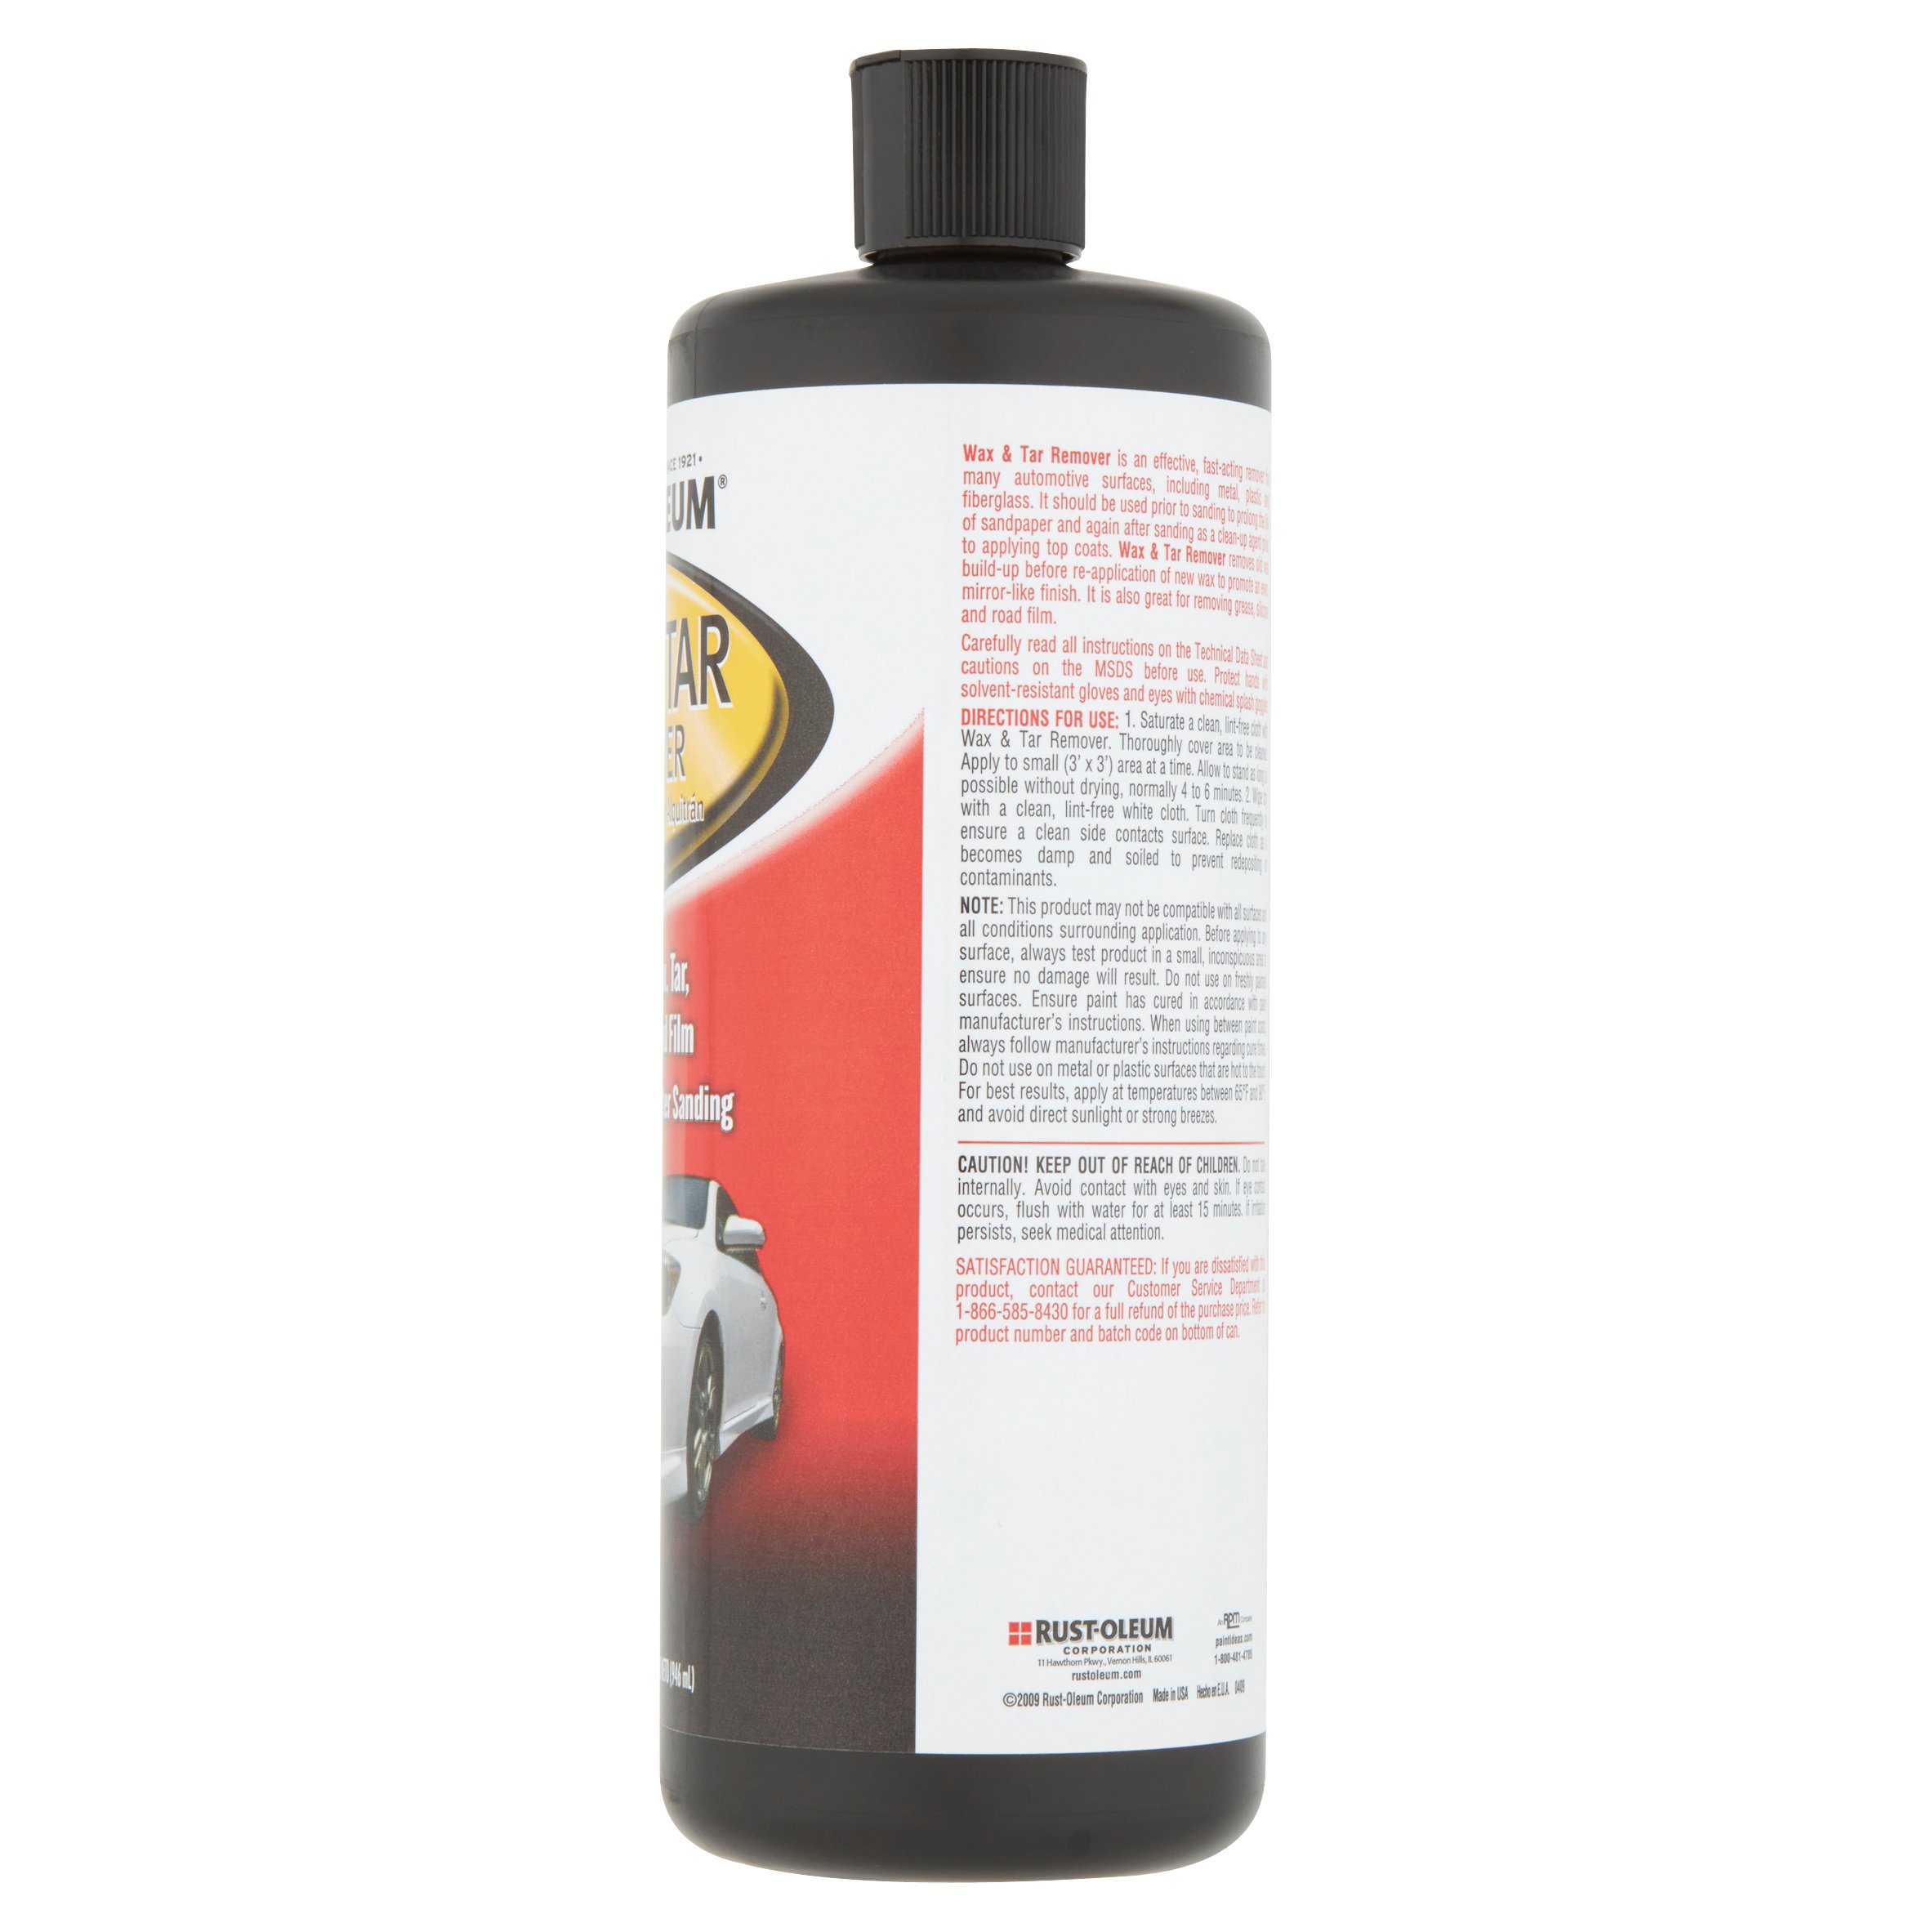 Rust-Oleum Automotive Wax and Tar Remover - image 5 of 5